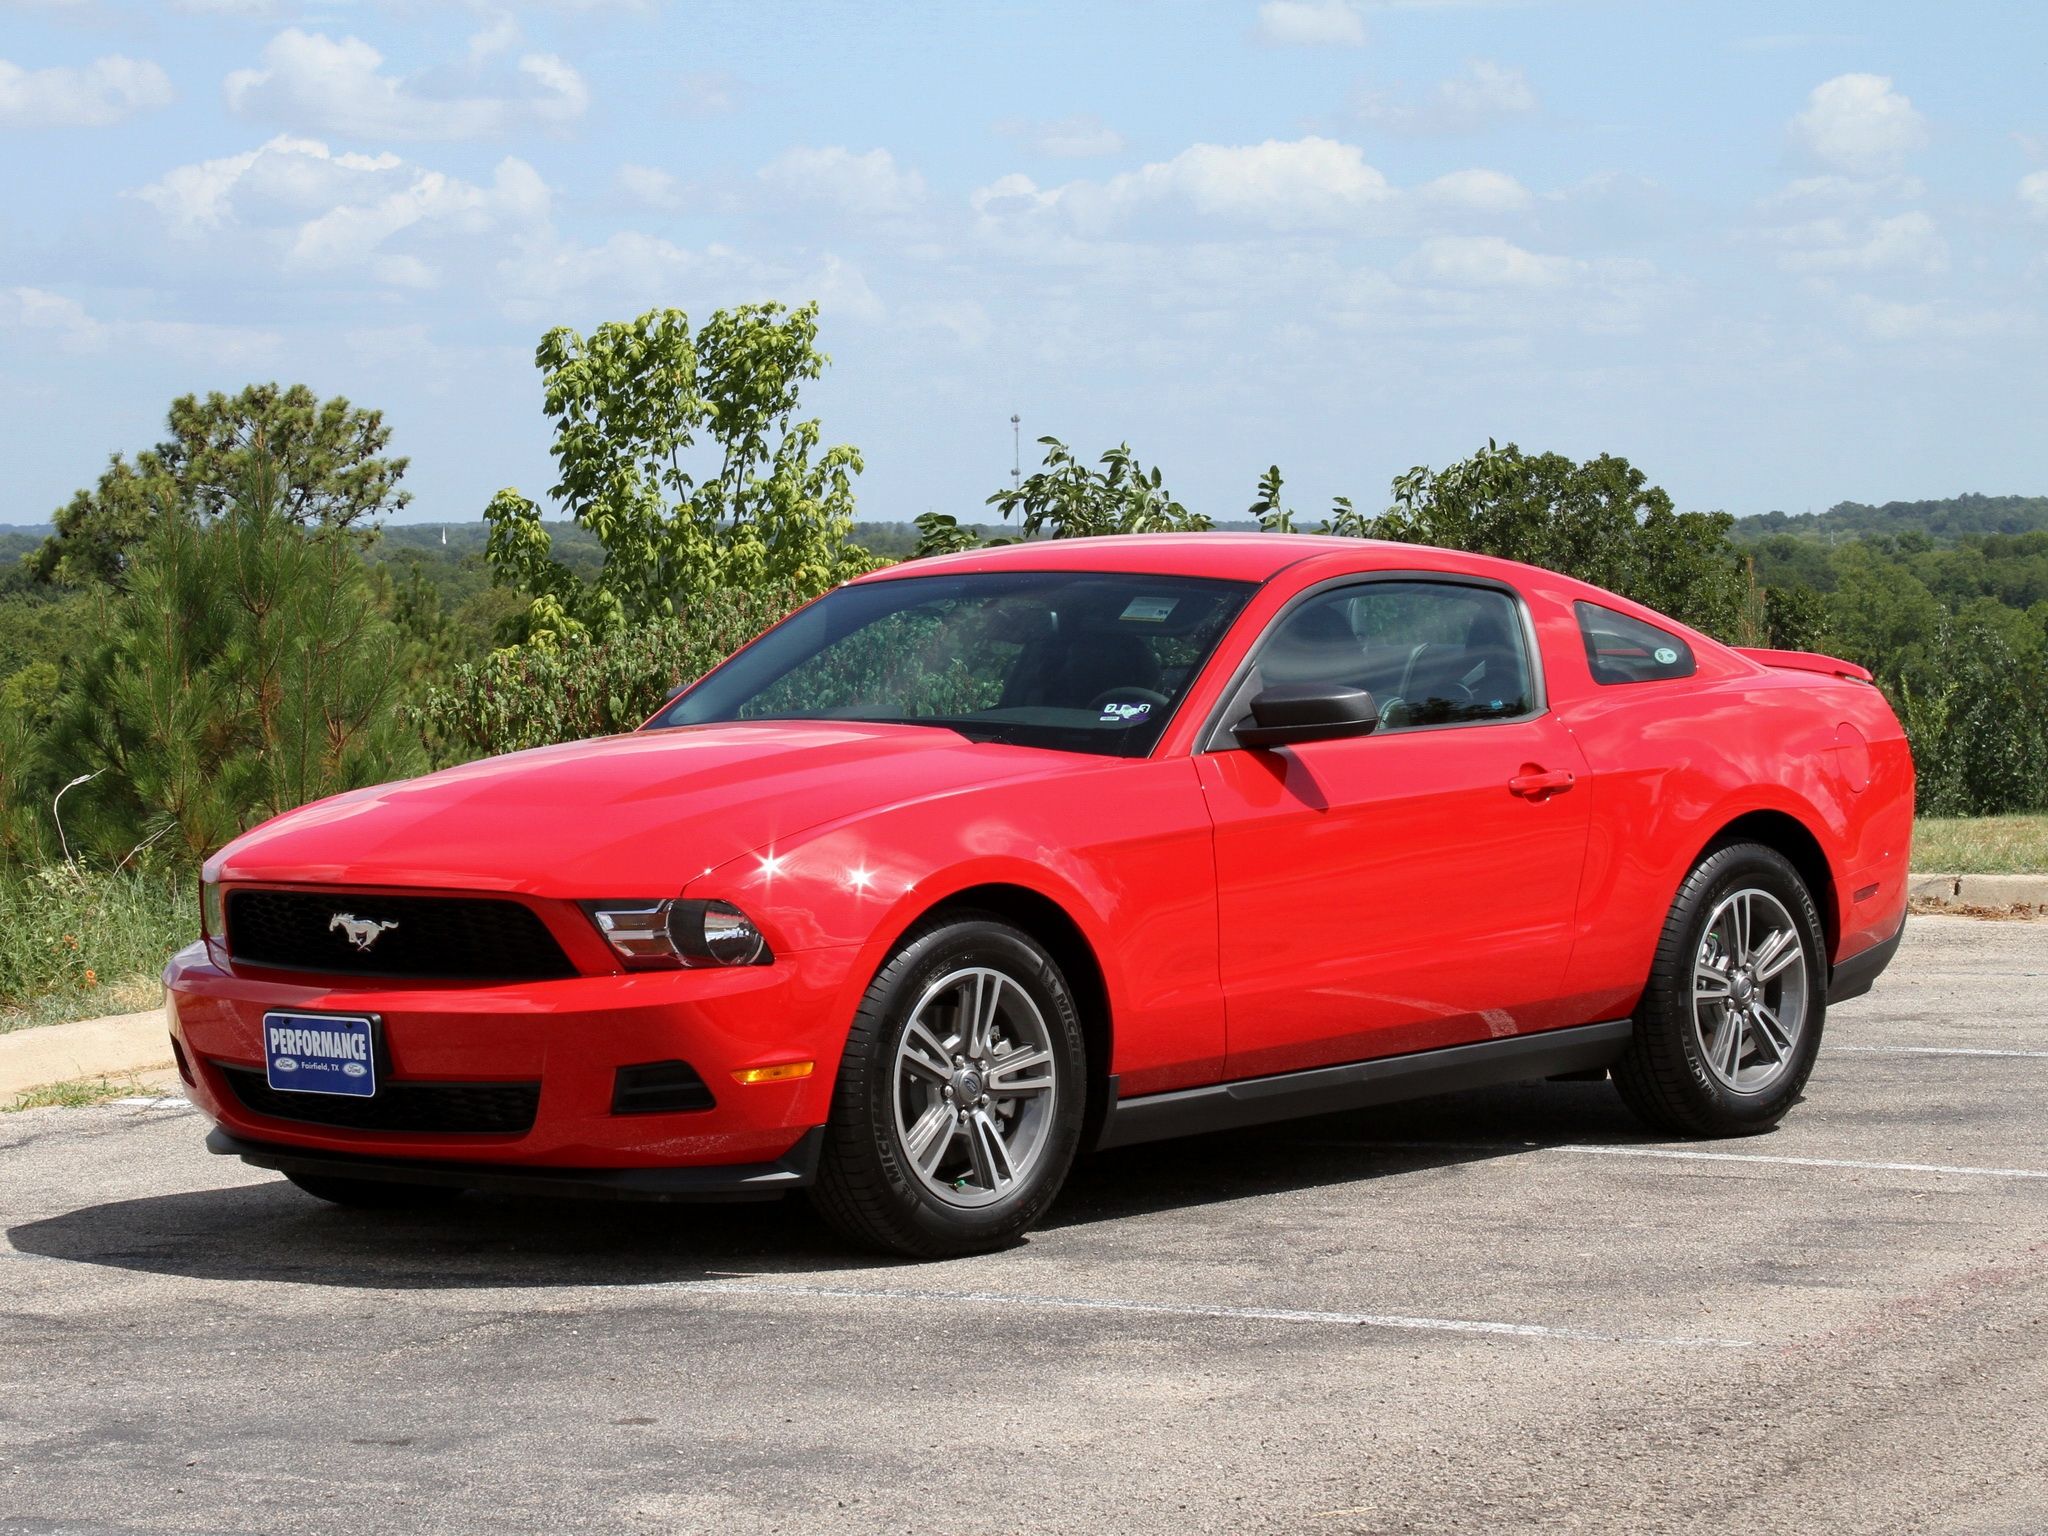 Ford Mustang (Fifth Generation)